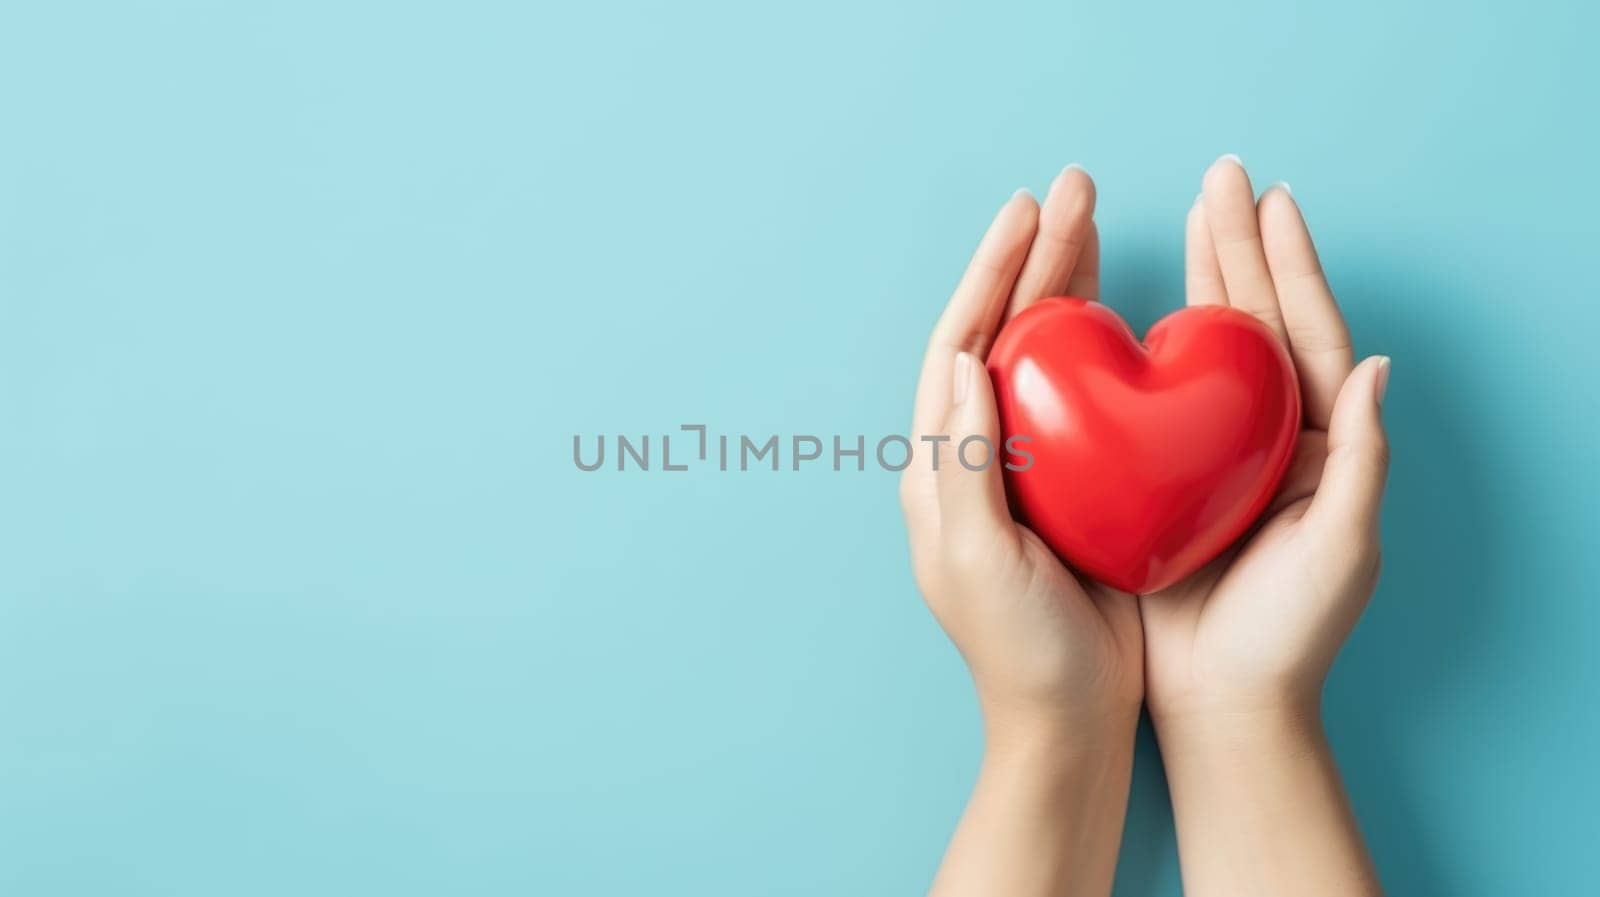 Hands holding red heart on blue background. St Valentine's Day vibe